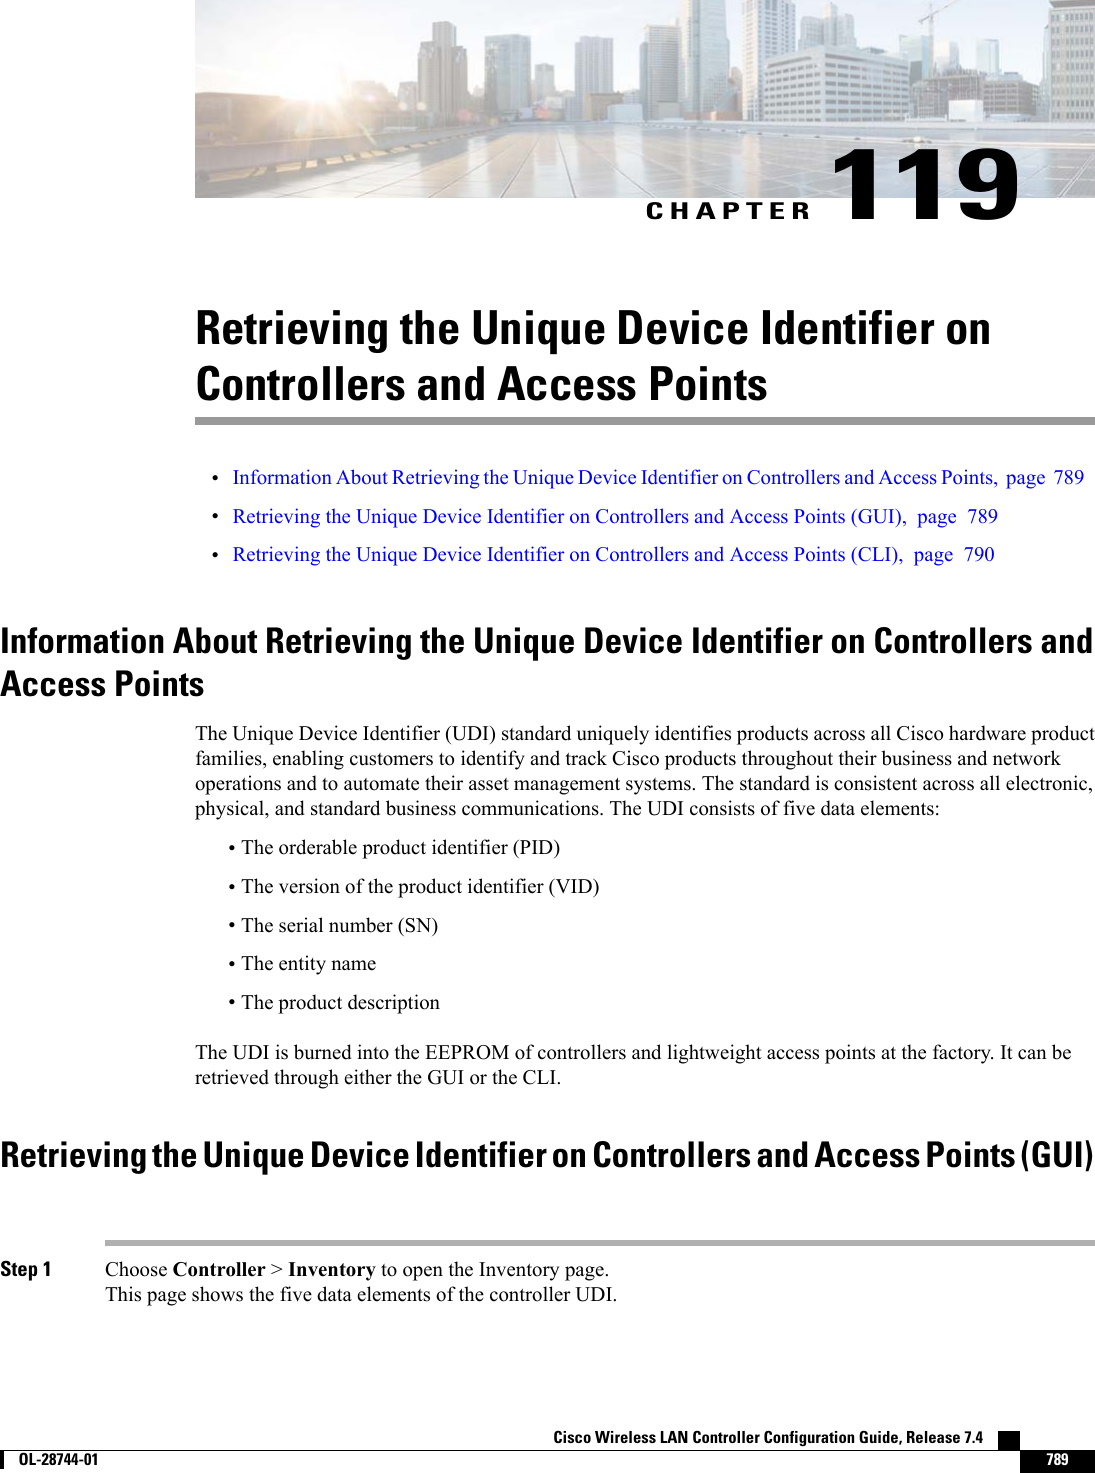 CHAPTER 119Retrieving the Unique Device Identifier onControllers and Access Points•Information About Retrieving the Unique Device Identifier on Controllers and Access Points, page 789•Retrieving the Unique Device Identifier on Controllers and Access Points (GUI), page 789•Retrieving the Unique Device Identifier on Controllers and Access Points (CLI), page 790Information About Retrieving the Unique Device Identifier on Controllers andAccess PointsThe Unique Device Identifier (UDI) standard uniquely identifies products across all Cisco hardware productfamilies, enabling customers to identify and track Cisco products throughout their business and networkoperations and to automate their asset management systems. The standard is consistent across all electronic,physical, and standard business communications. The UDI consists of five data elements:•The orderable product identifier (PID)•The version of the product identifier (VID)•The serial number (SN)•The entity name•The product descriptionThe UDI is burned into the EEPROM of controllers and lightweight access points at the factory. It can beretrieved through either the GUI or the CLI.Retrieving the Unique Device Identifier on Controllers and Access Points (GUI)Step 1 Choose Controller &gt;Inventory to open the Inventory page.This page shows the five data elements of the controller UDI.Cisco Wireless LAN Controller Configuration Guide, Release 7.4        OL-28744-01 789